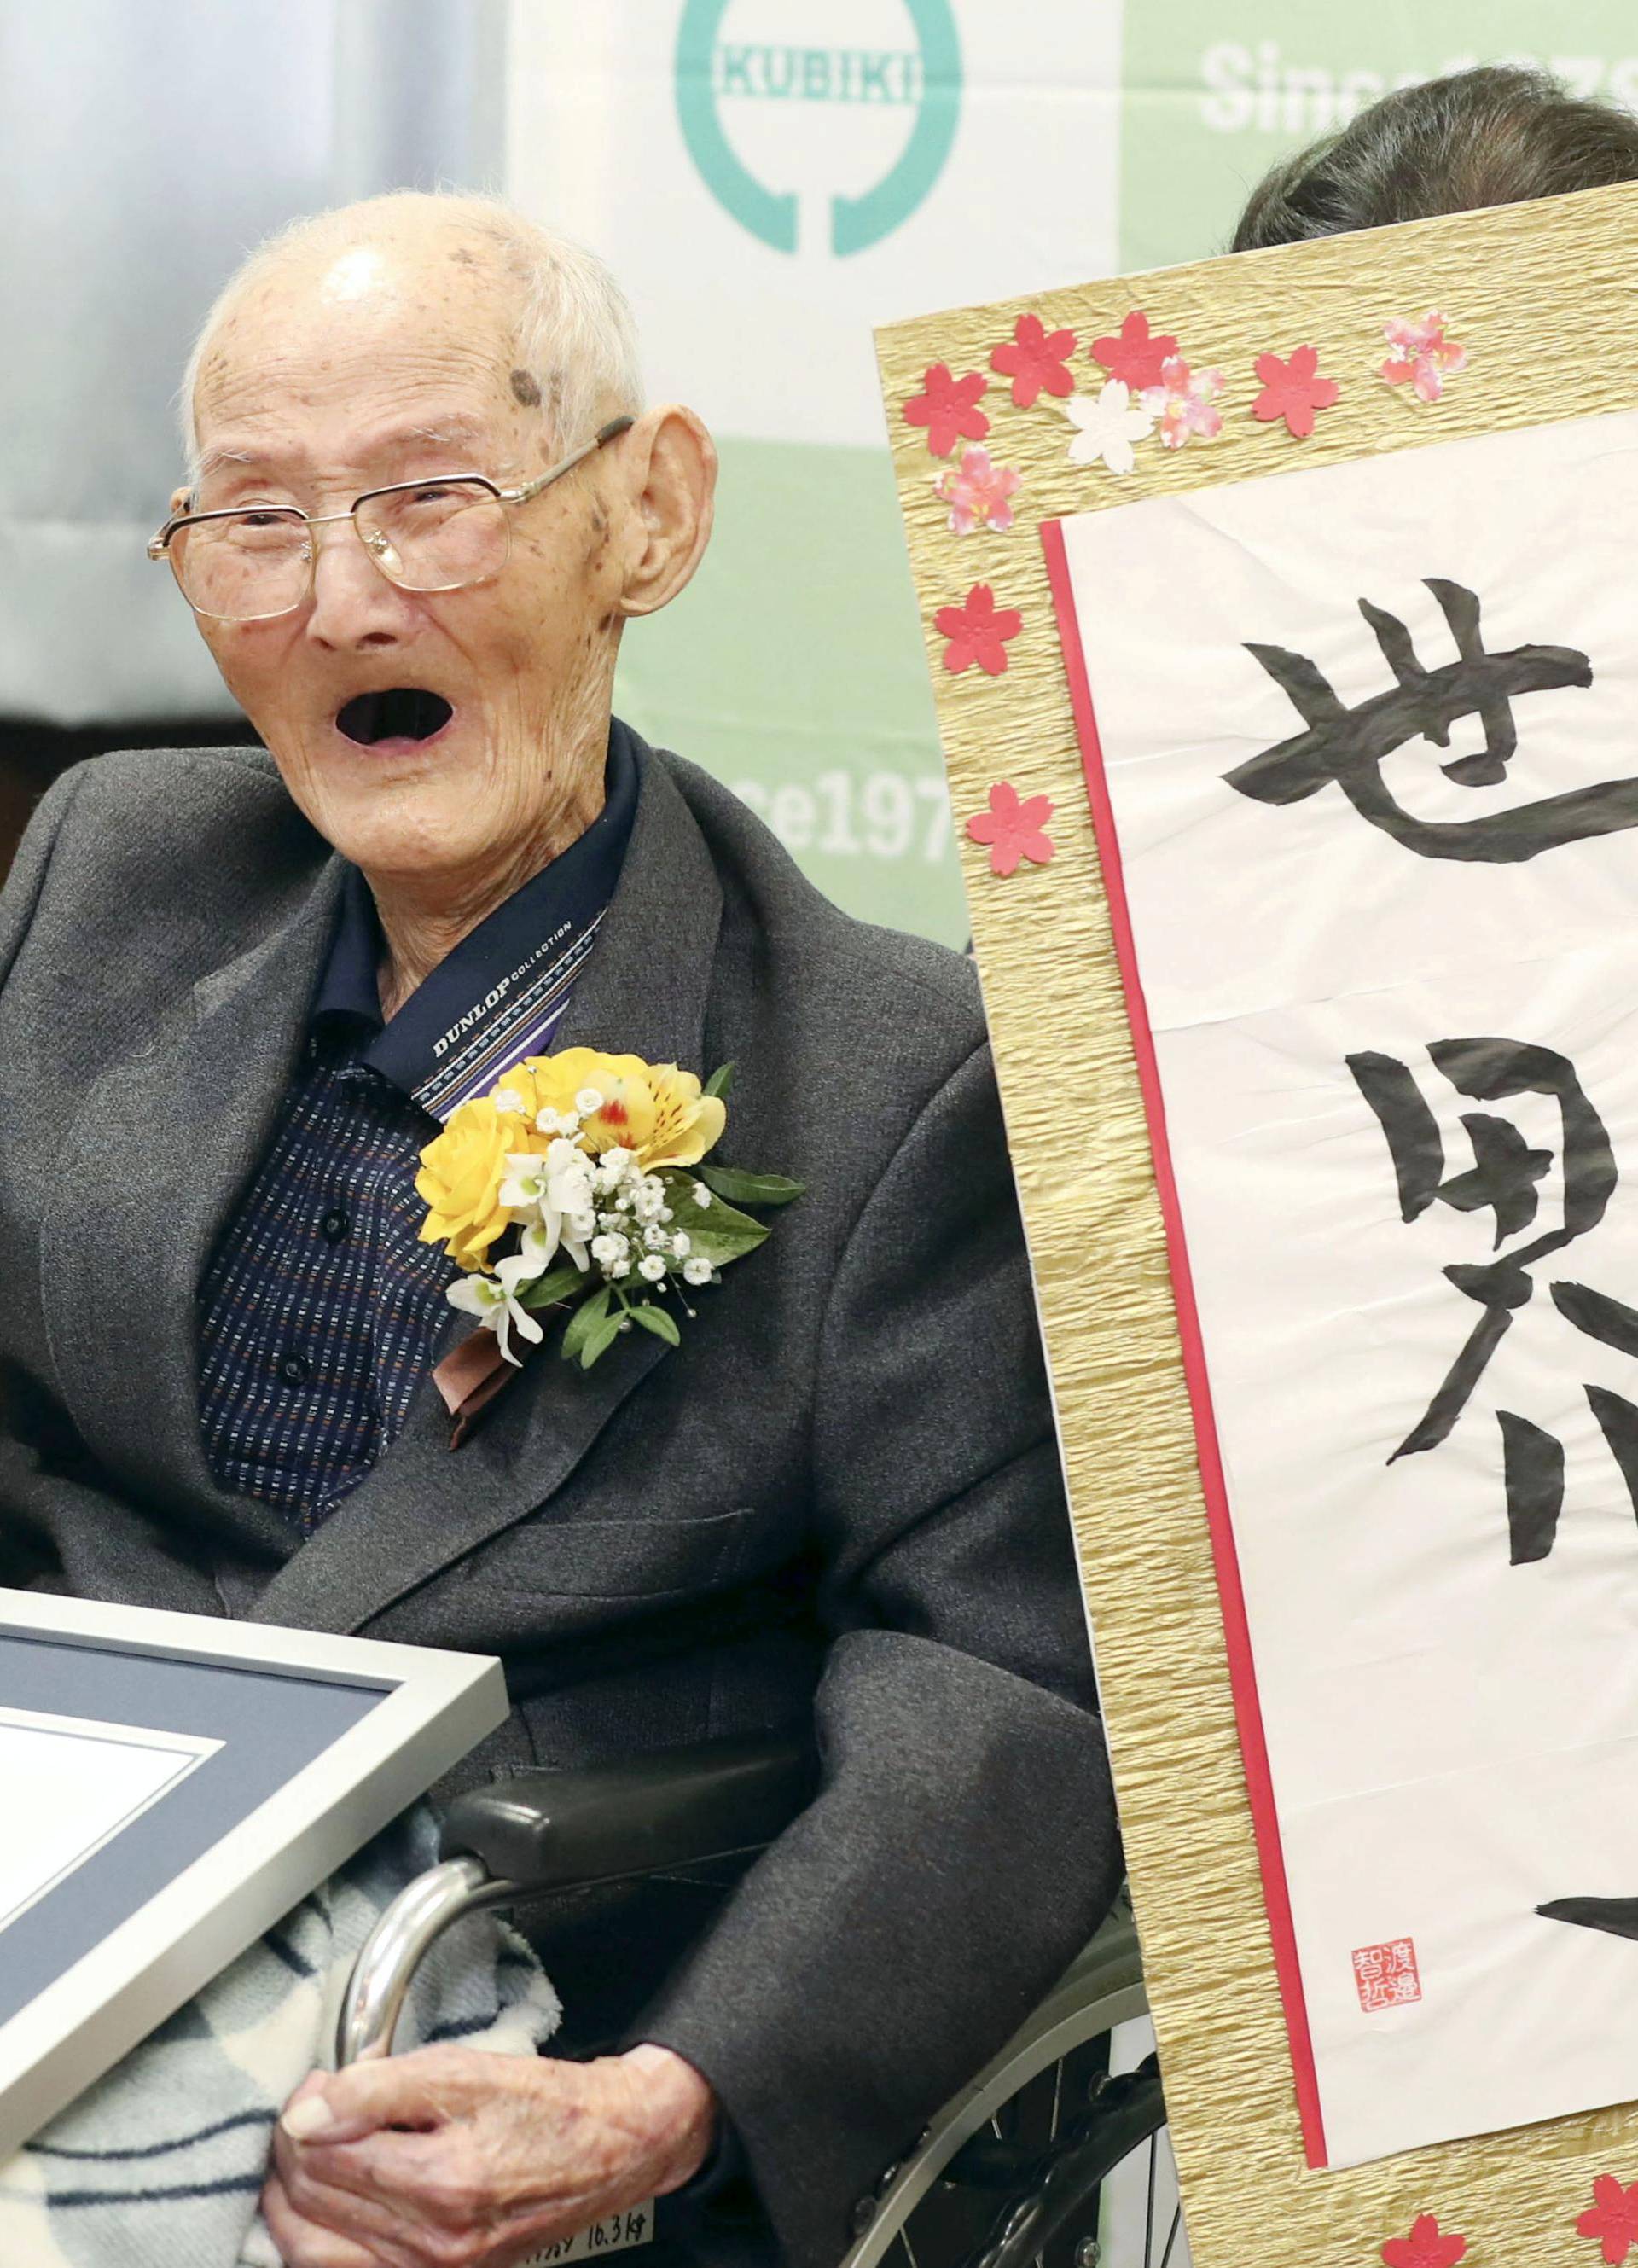 112-year-old Chitetsu Watanabe poses next to the calligraphy reading 'World Number One' after being awarded as the world's oldest living male by Guinness World Records, in Joetsu, Japan